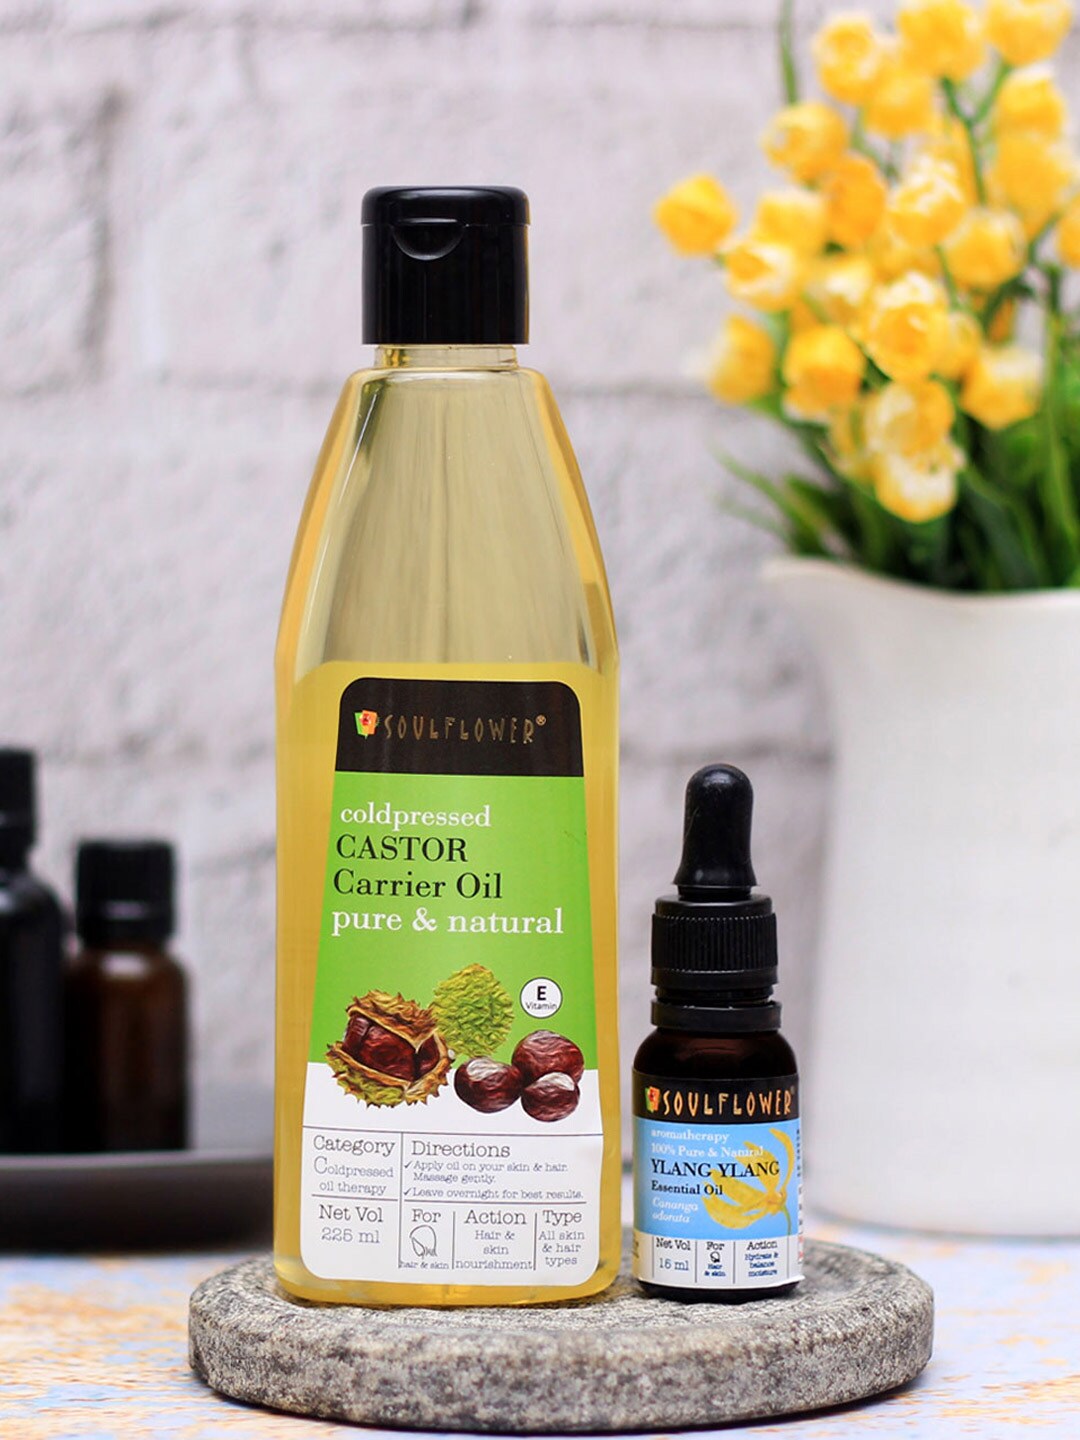 Soulflower Castor Carrier Oil & Ylang Ylang Essential Oil Combo 340 ml Price in India